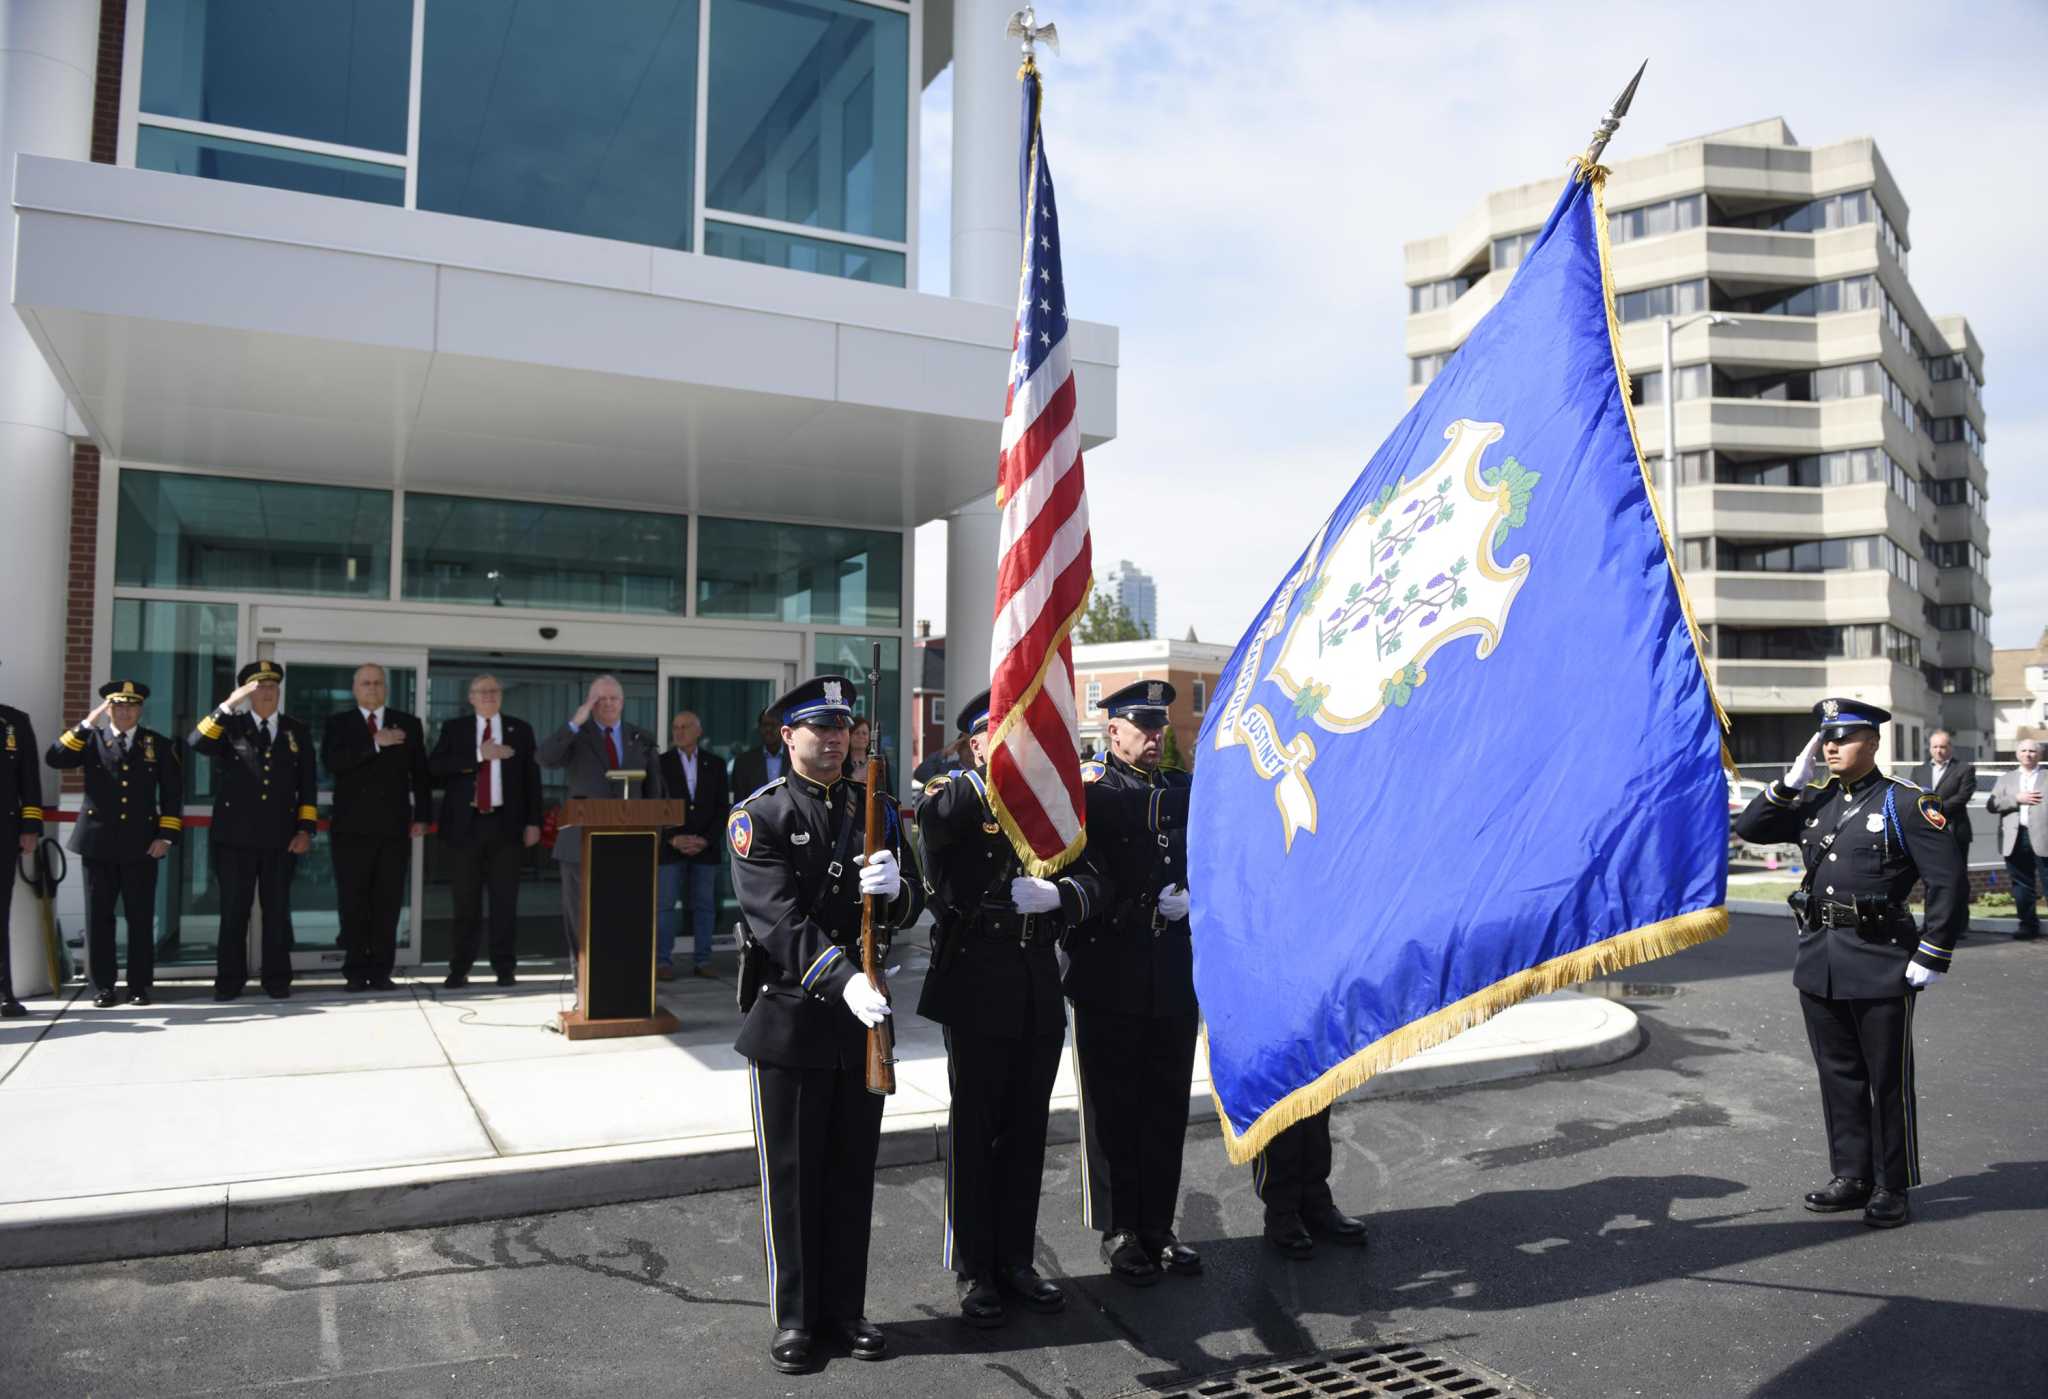 Stamford Police Department unveils its new headquarters